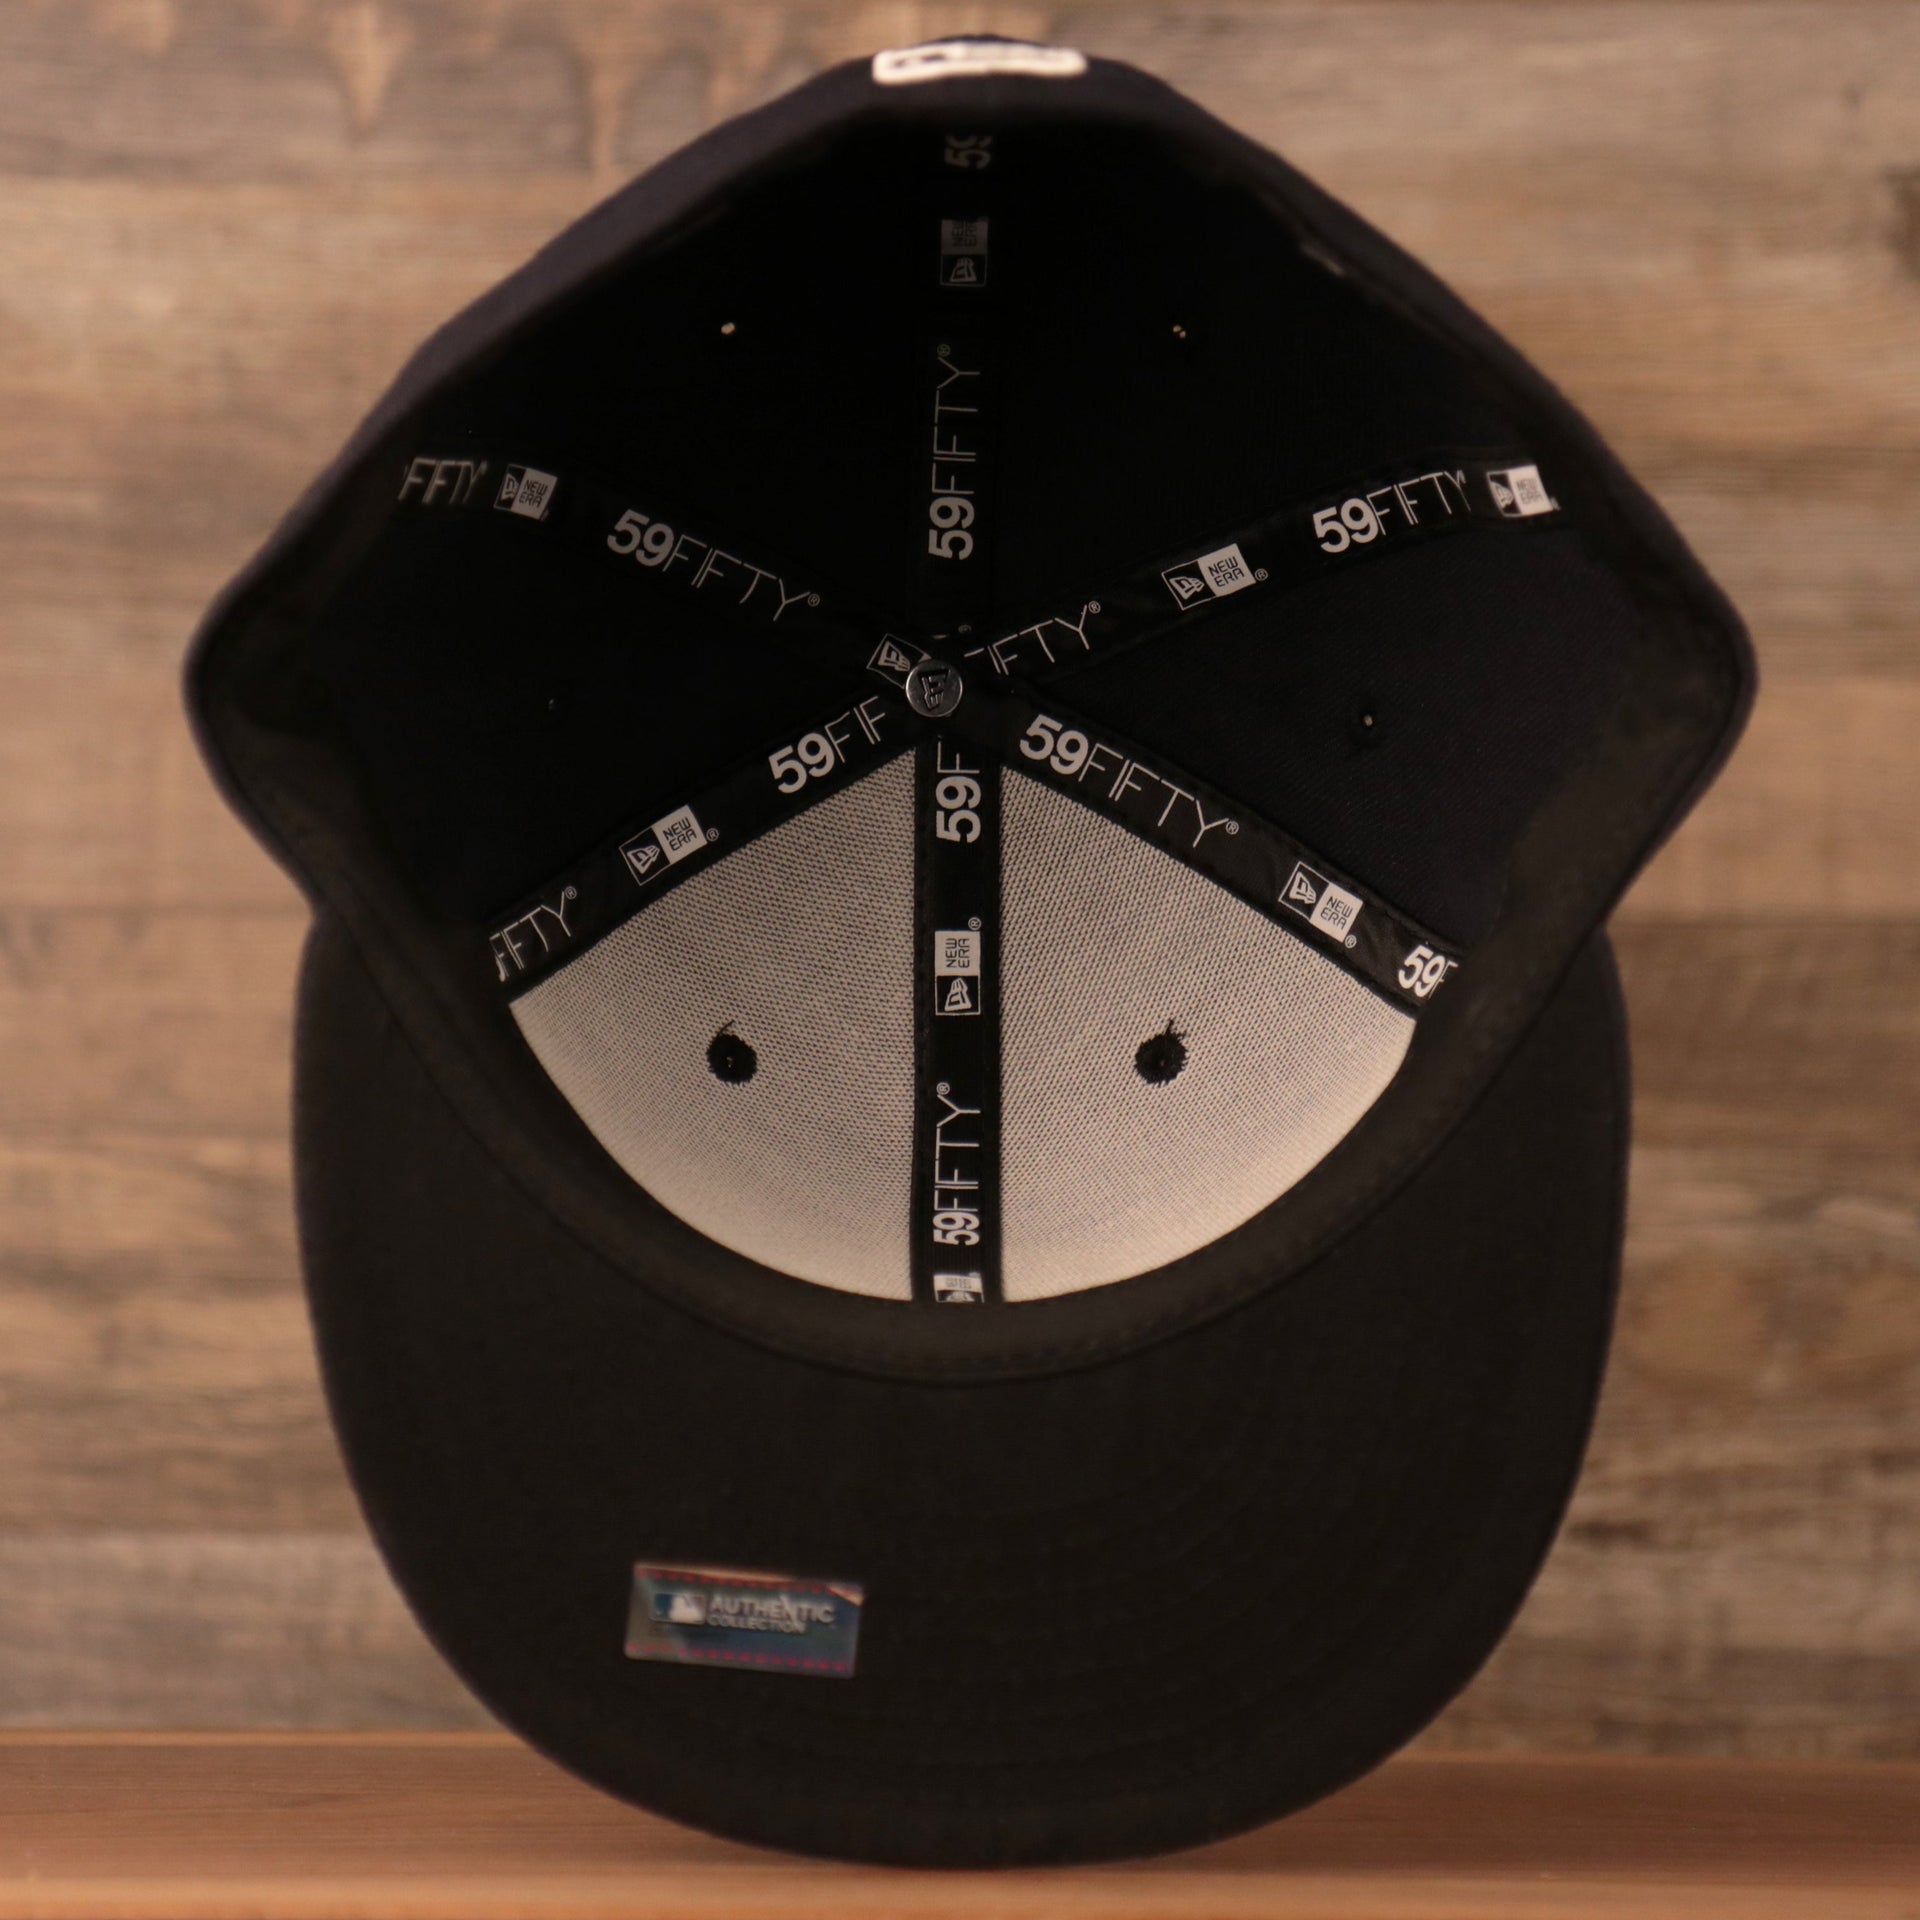 Bottom View of the Yankees Black Bottom on Field 59Fifty which has the 59Fifty taping around it